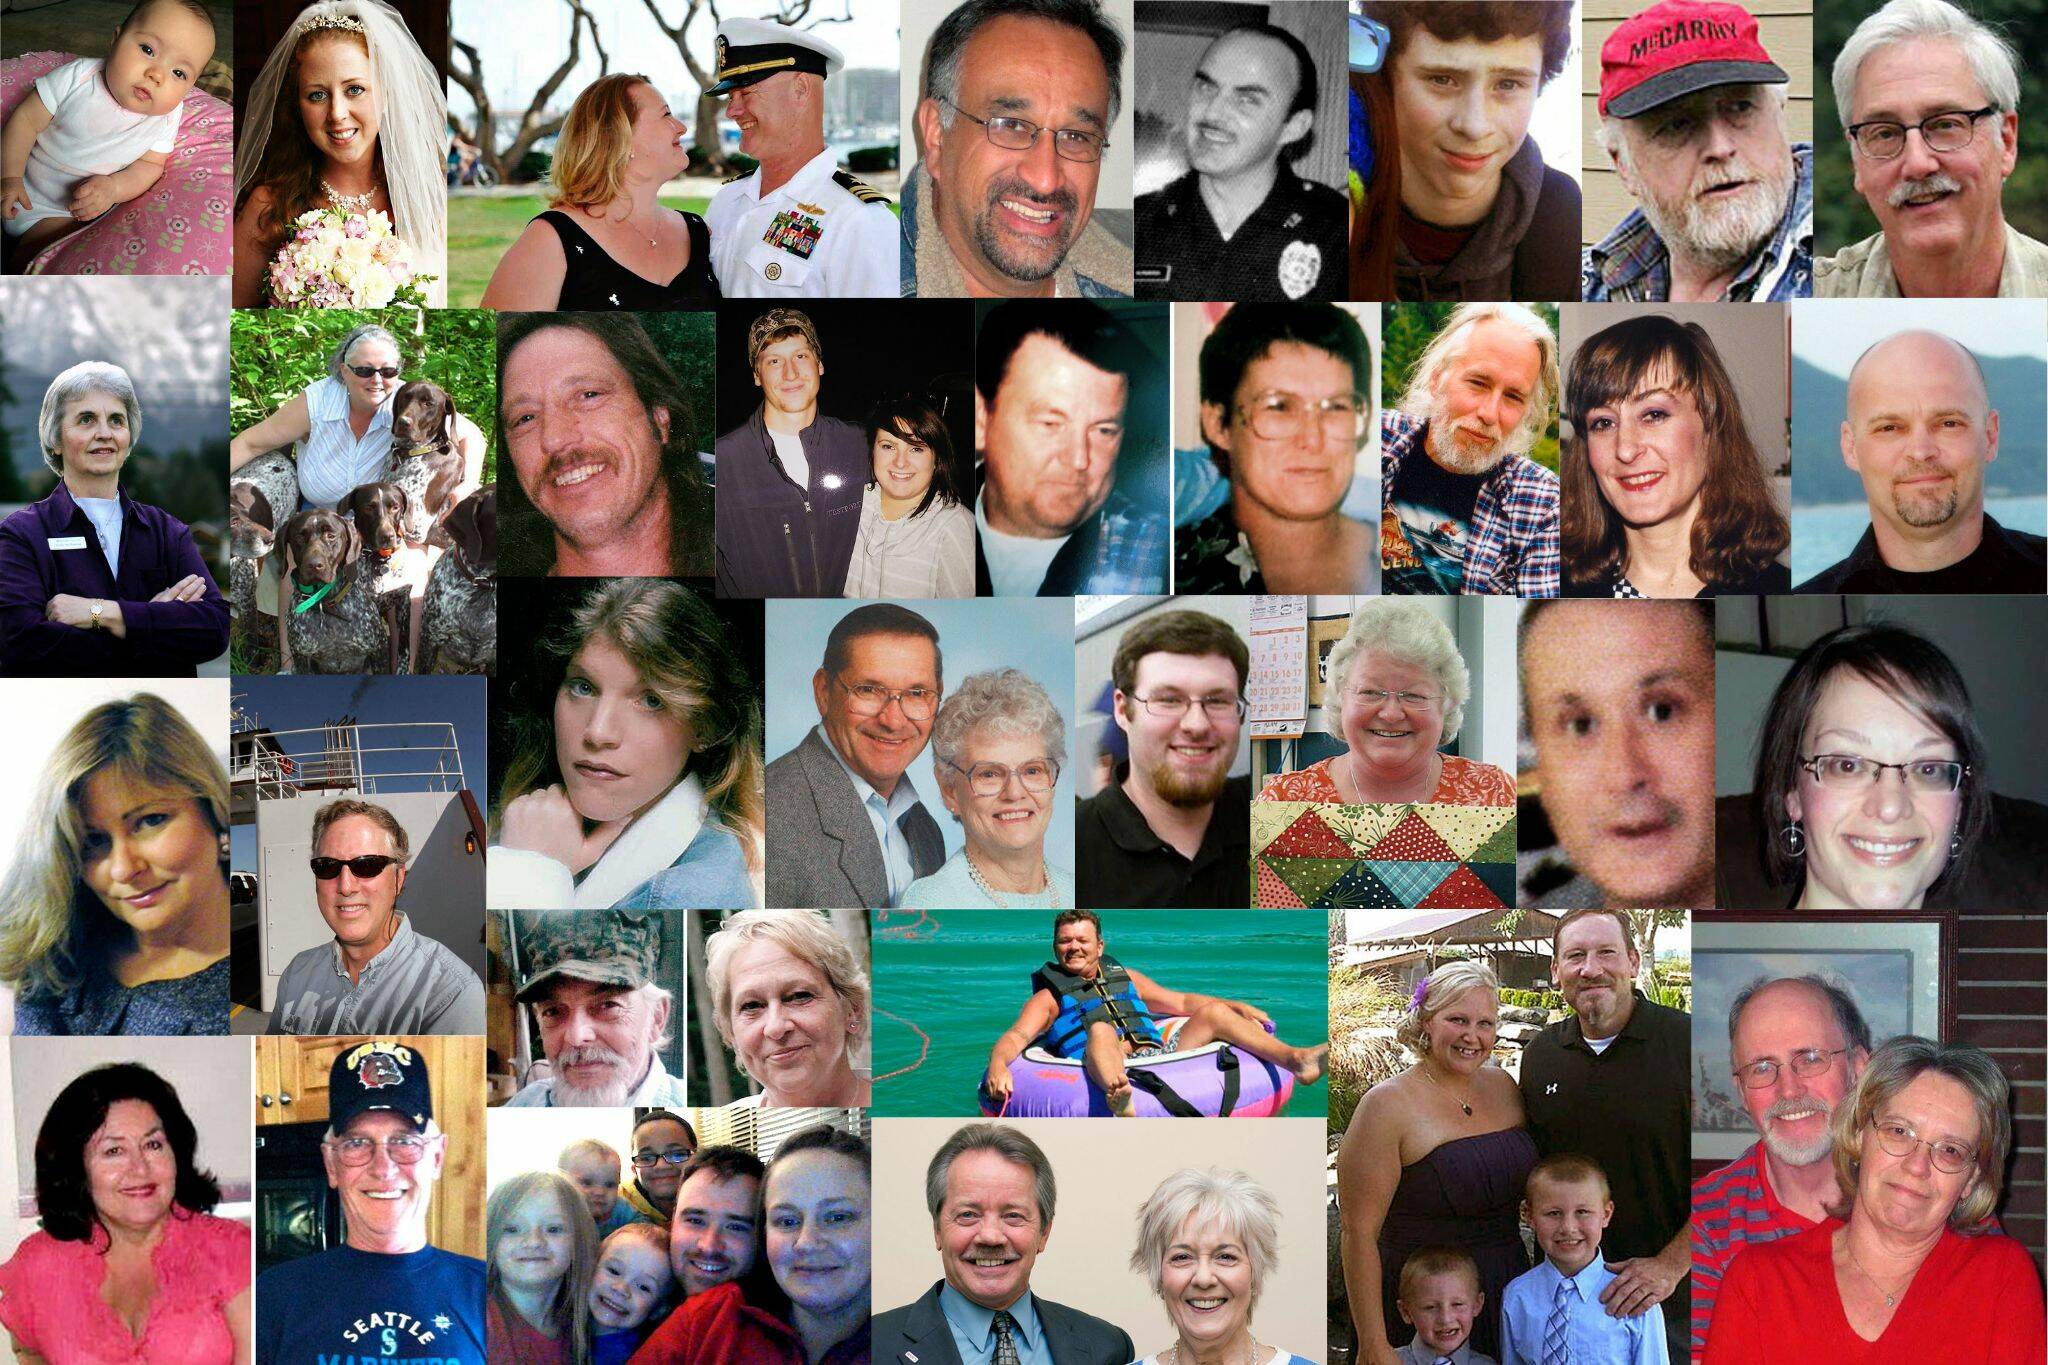 Victims of the Oso mudslide on March 22, 2014. (Courtesy photos)